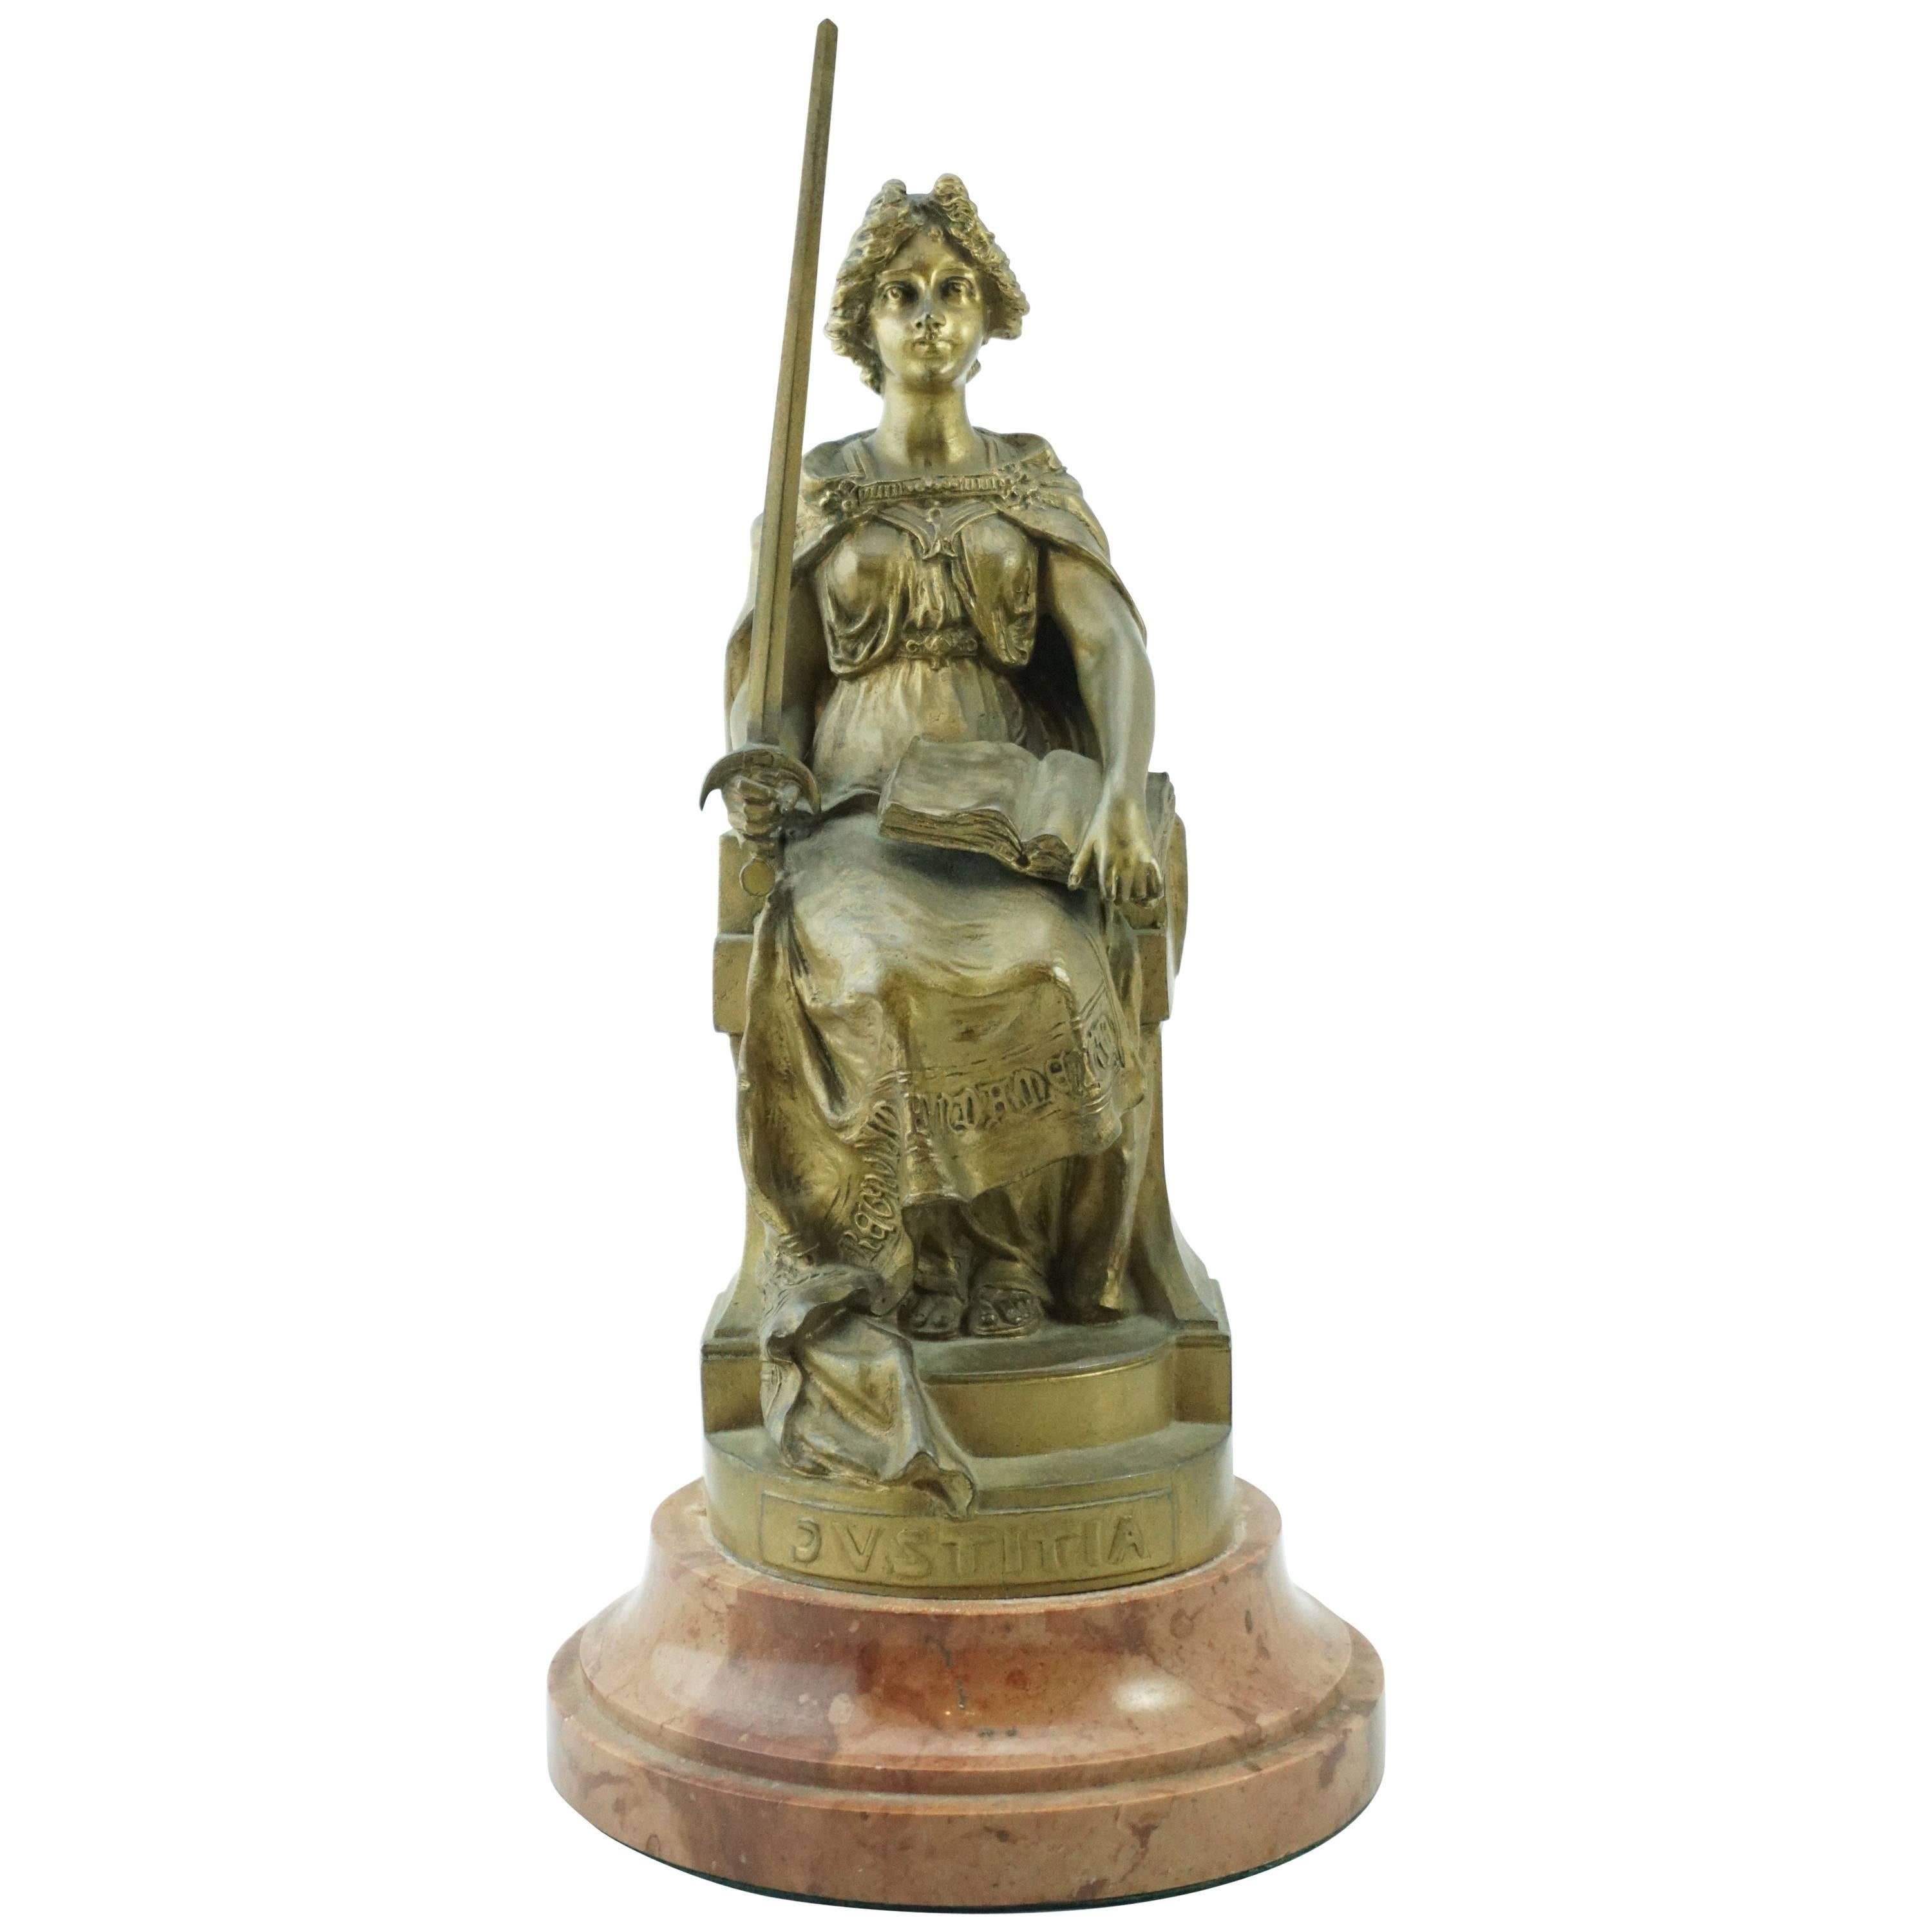 Wonderful and rare original Carl Kauba (1865-1922) gilt bronze of a Lady with sword and law book titled "Justitia"

Signed: C Kauba and Geschutzt 4889. 

Height: 10.7 Inches with marble plinth. 5 inches wide

Condition: No issues

AVANTIQUES is